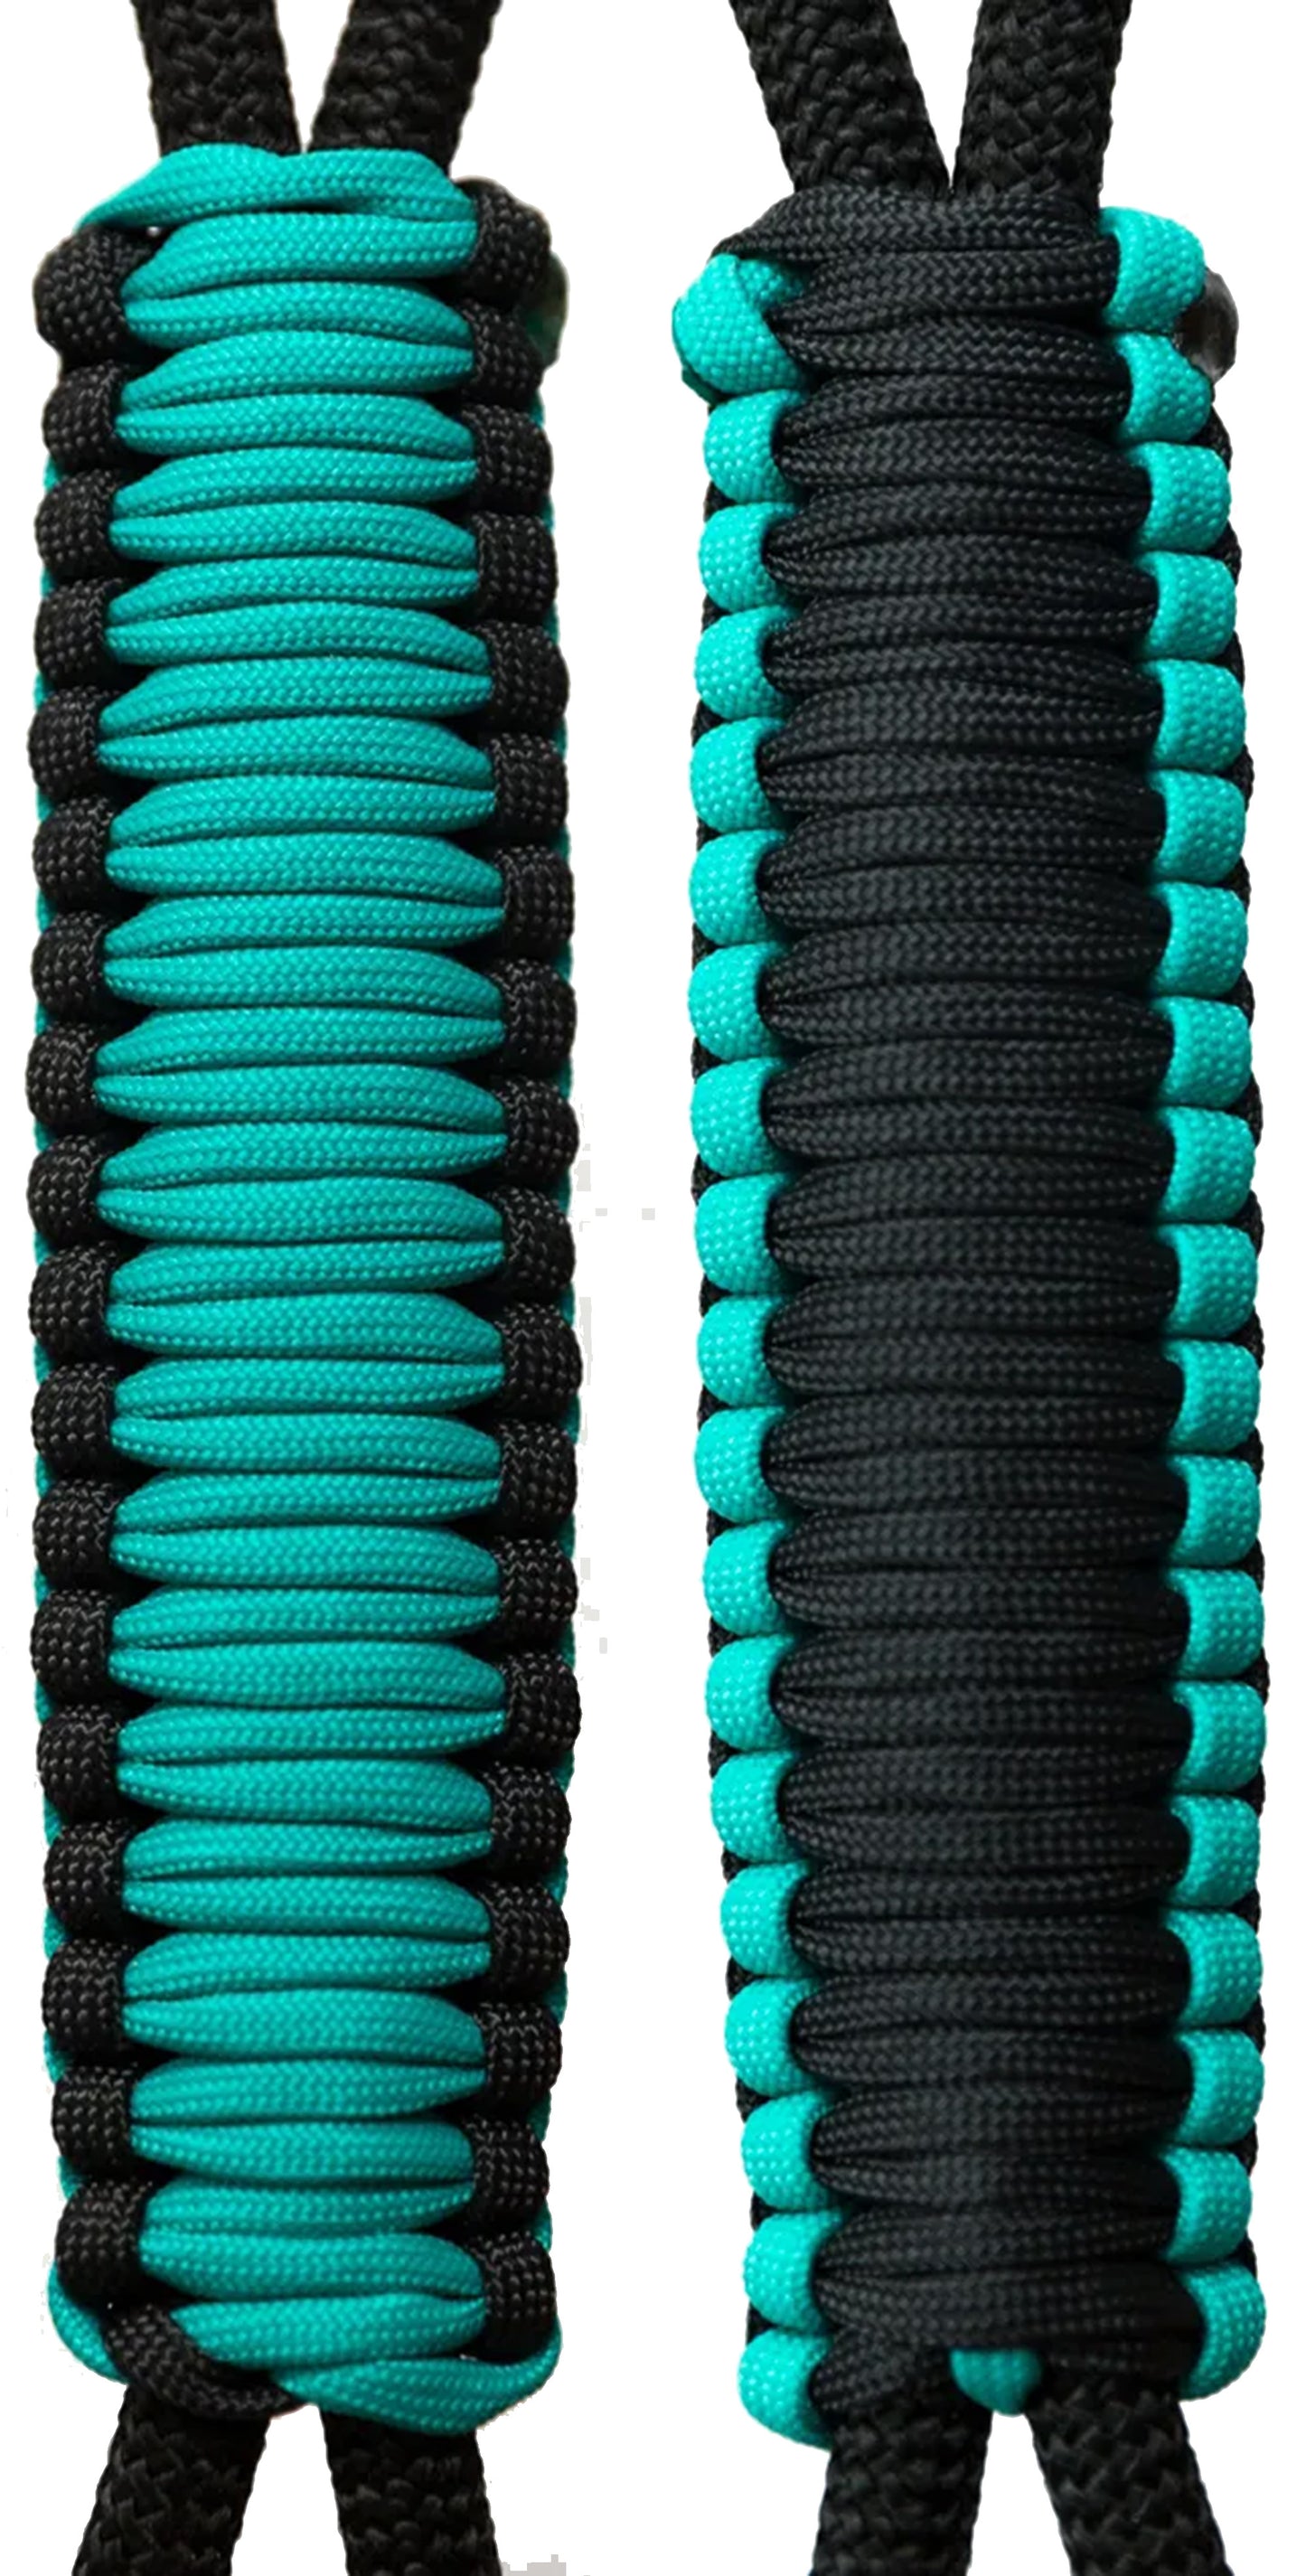 Teal & Black C017C031 - Paracord Handmade Handles for Stainless Steel Tumblers - Made in USA!